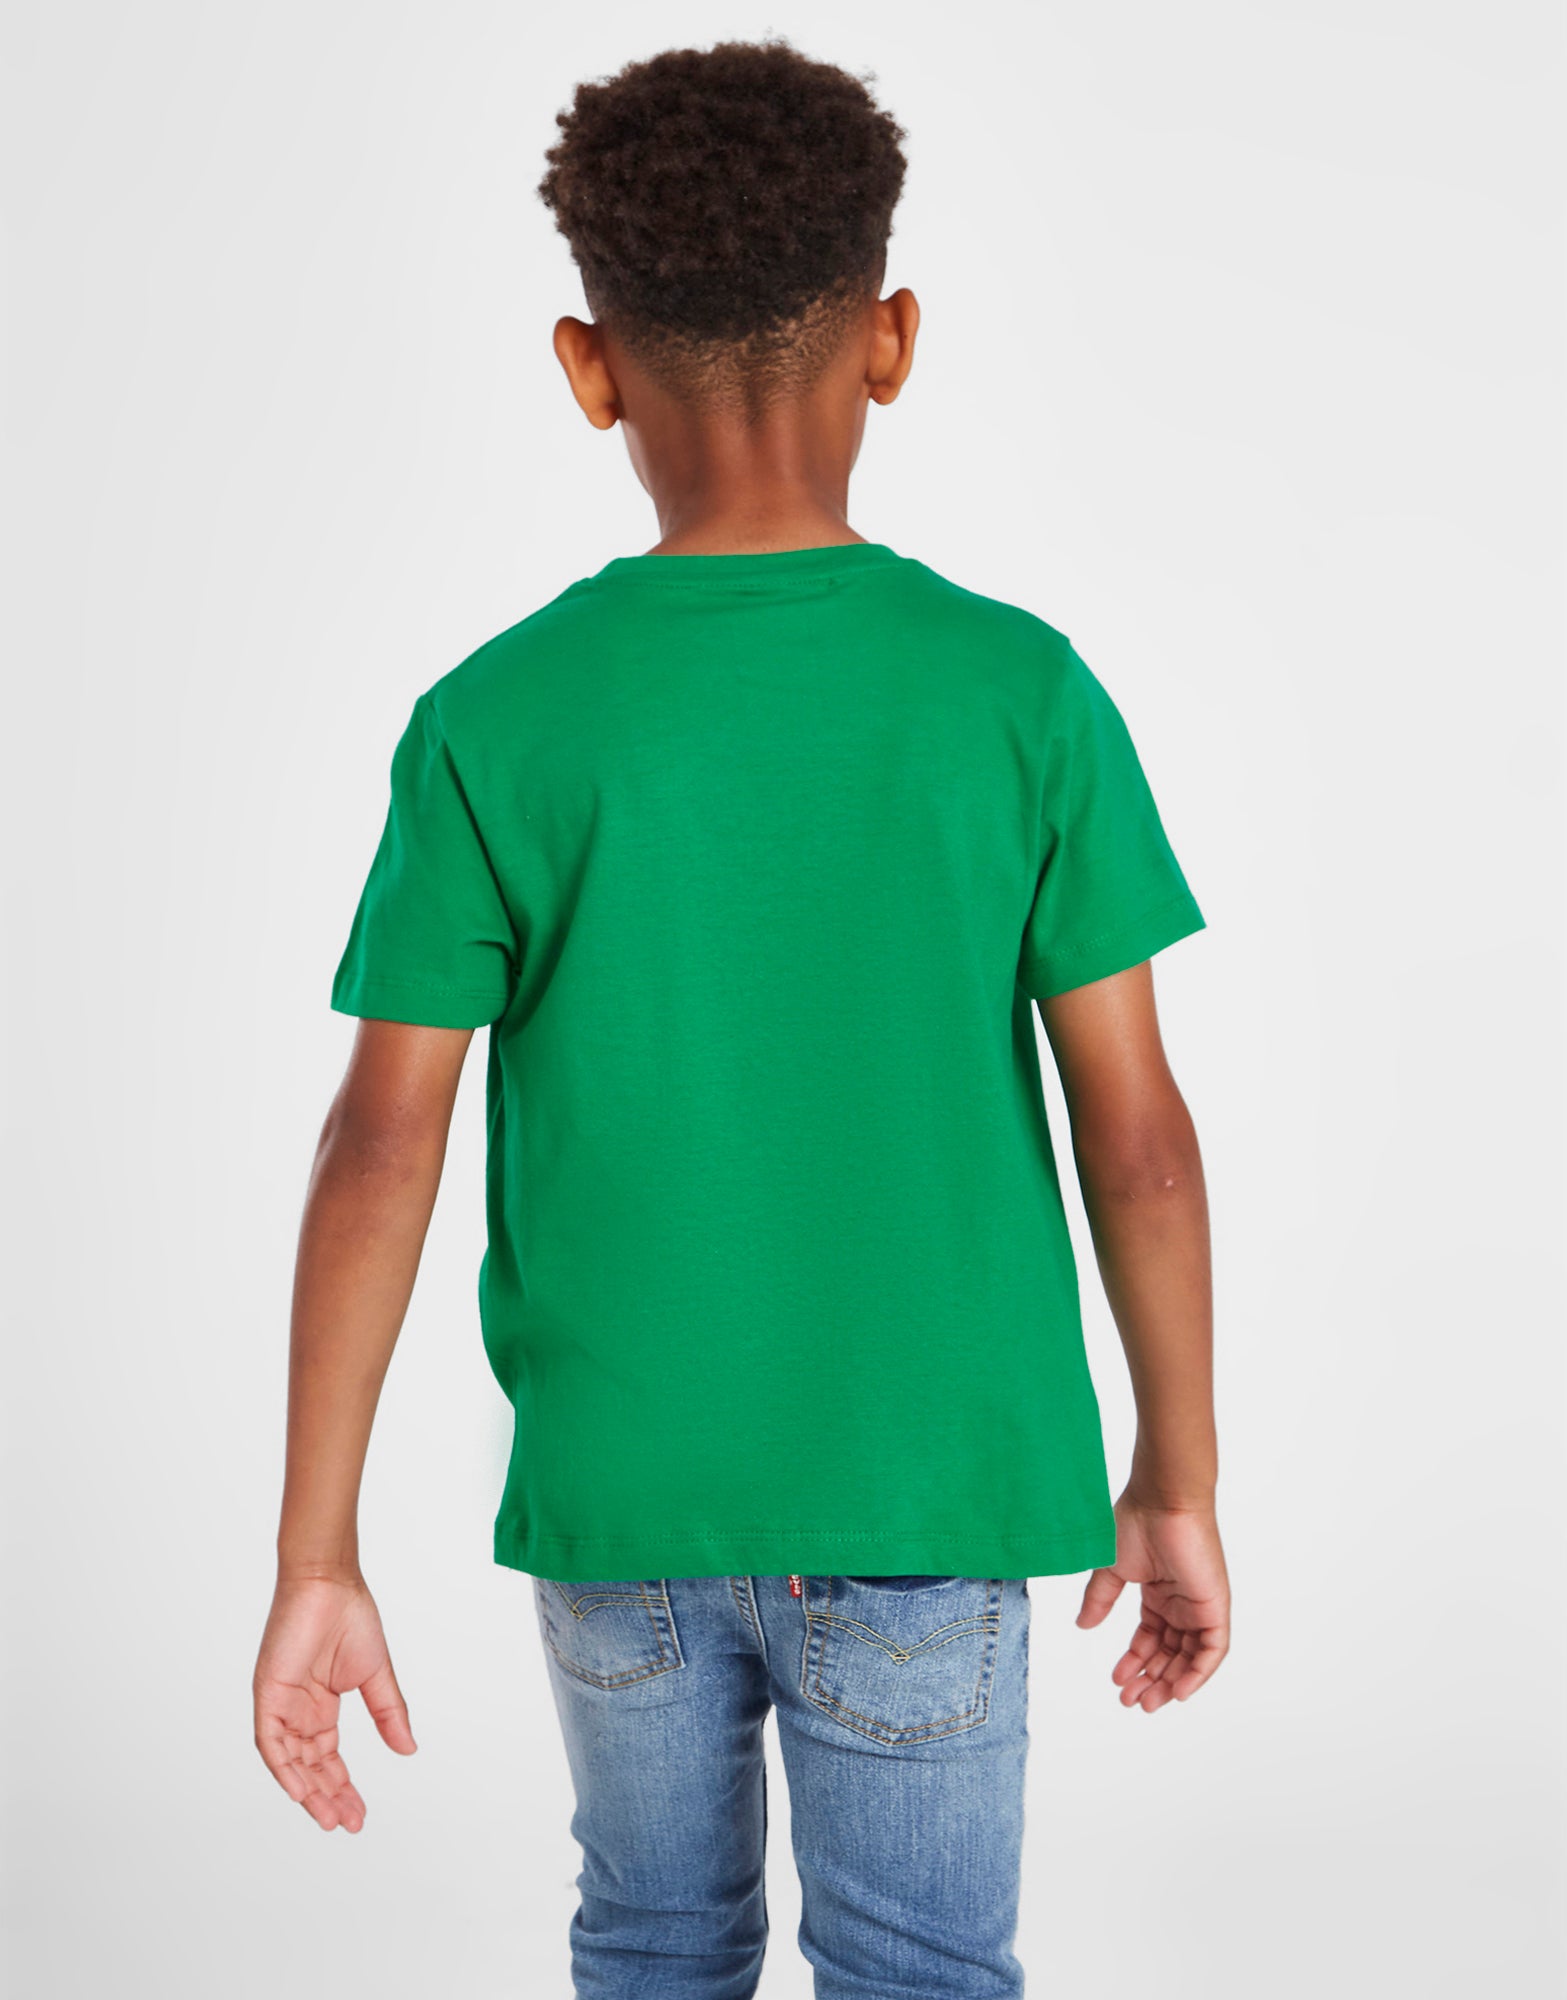 Official Team Wales Kids 'Together Stronger' T-Shirt - Green - The World Football Store